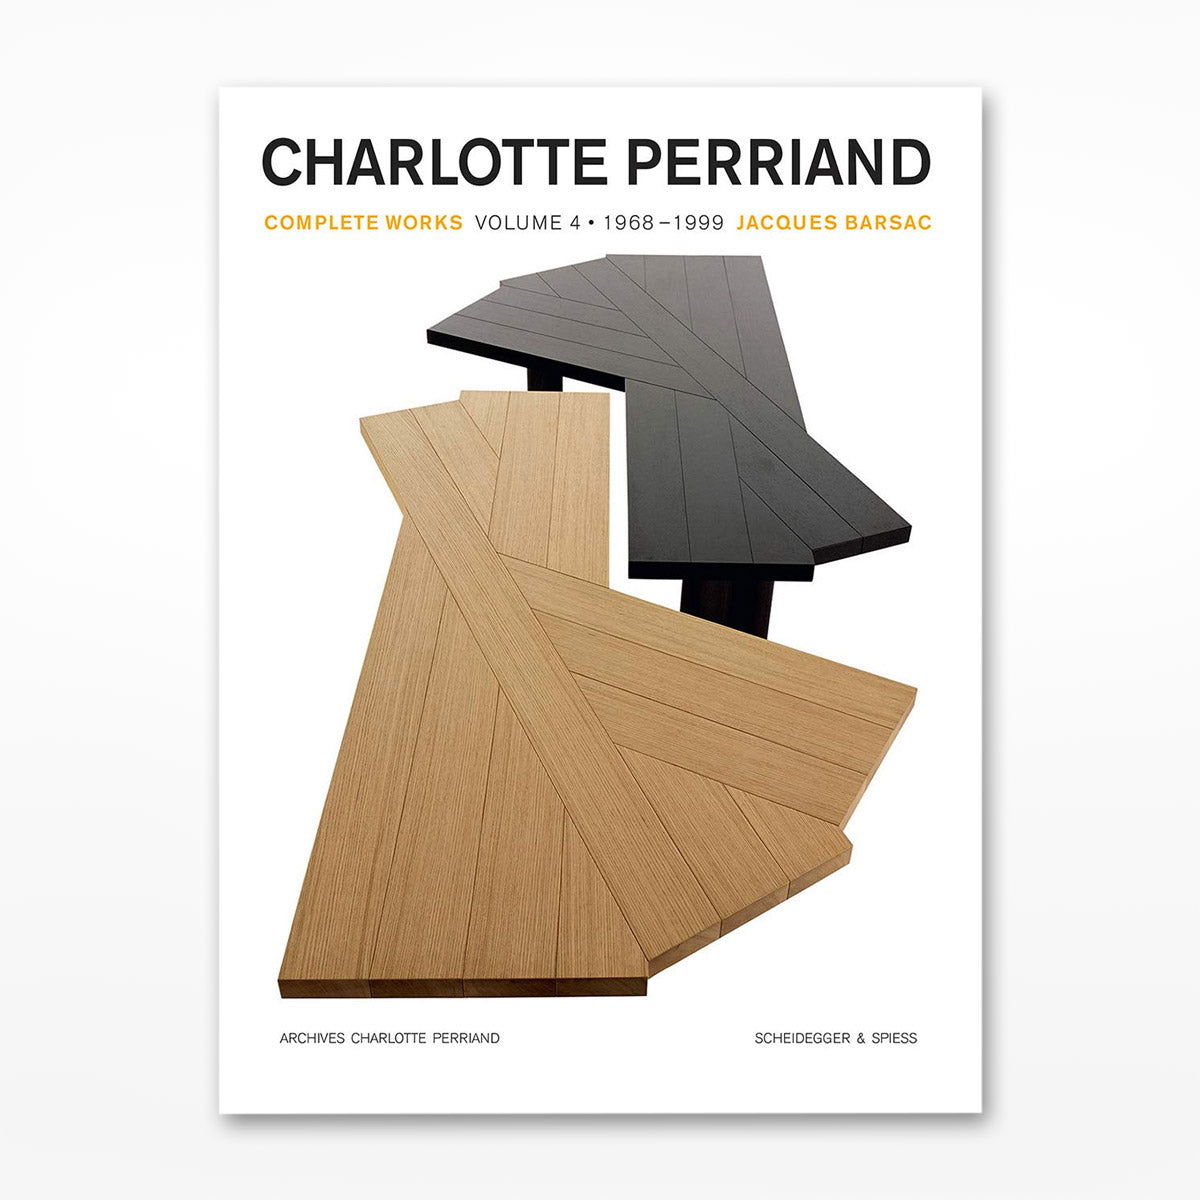 Charlotte Perriand at the Design Museum